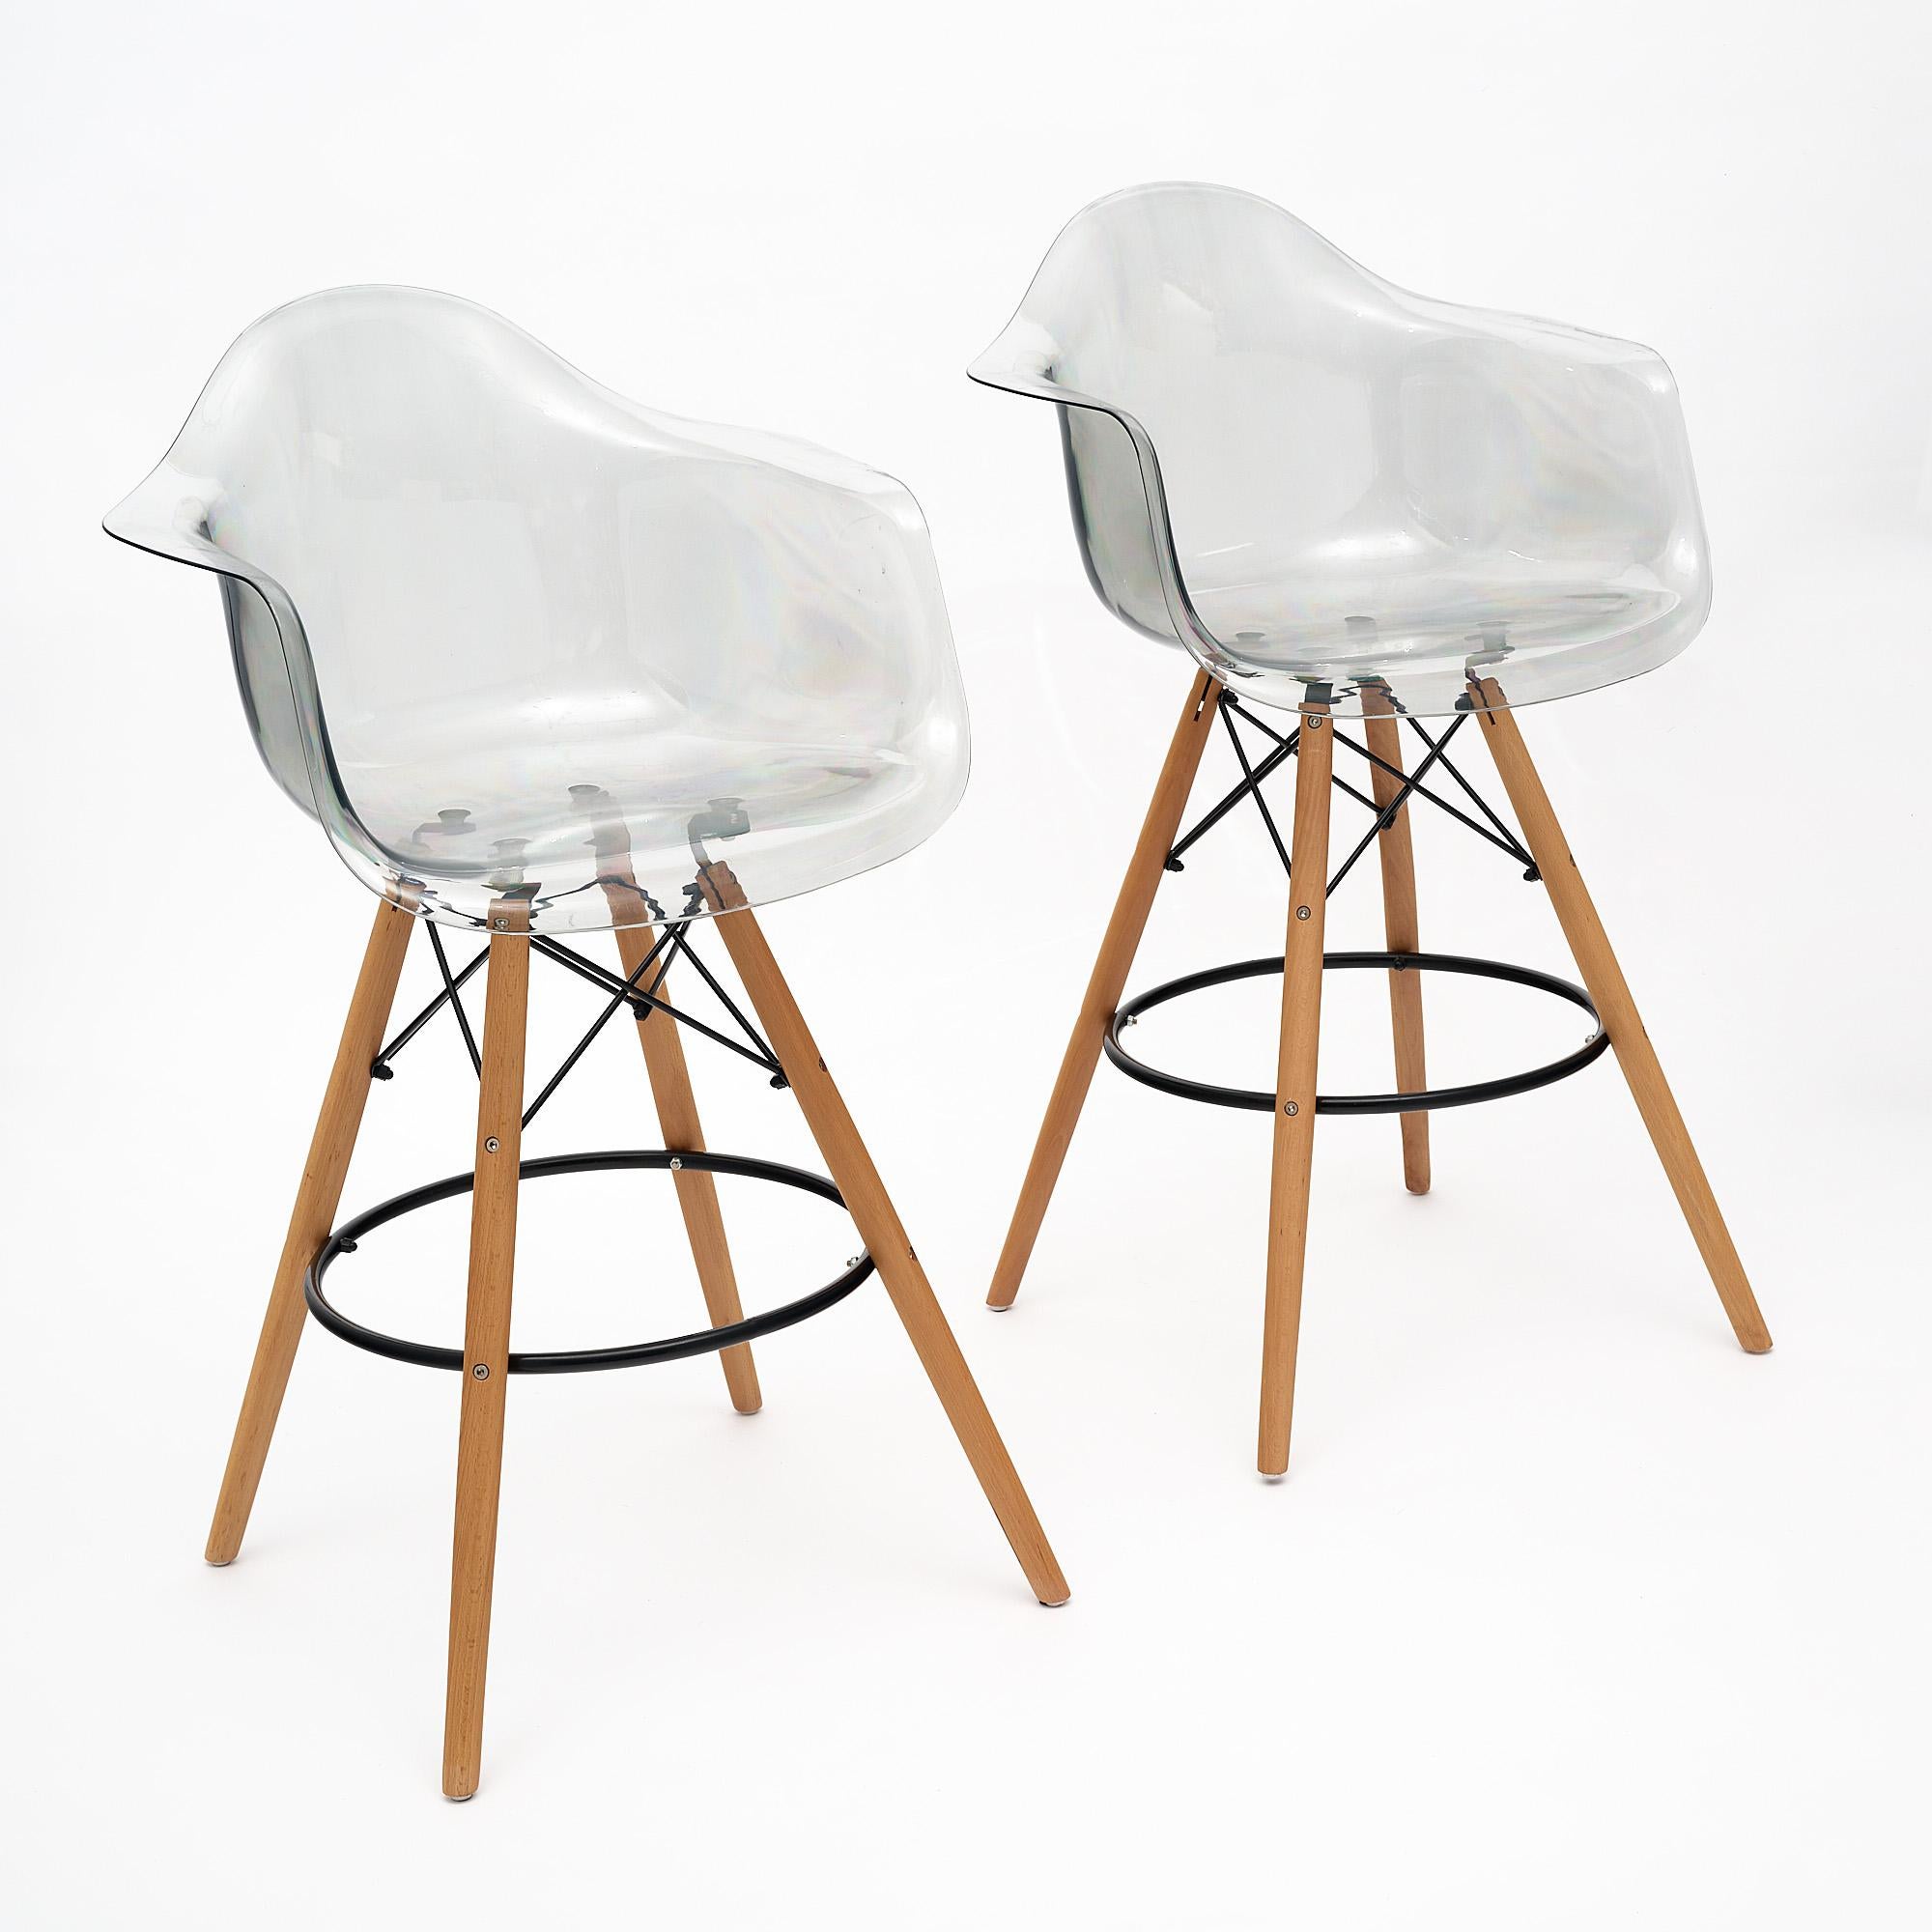 Pair of high chairs or bar stools made of Lucite with a wood and steel base.